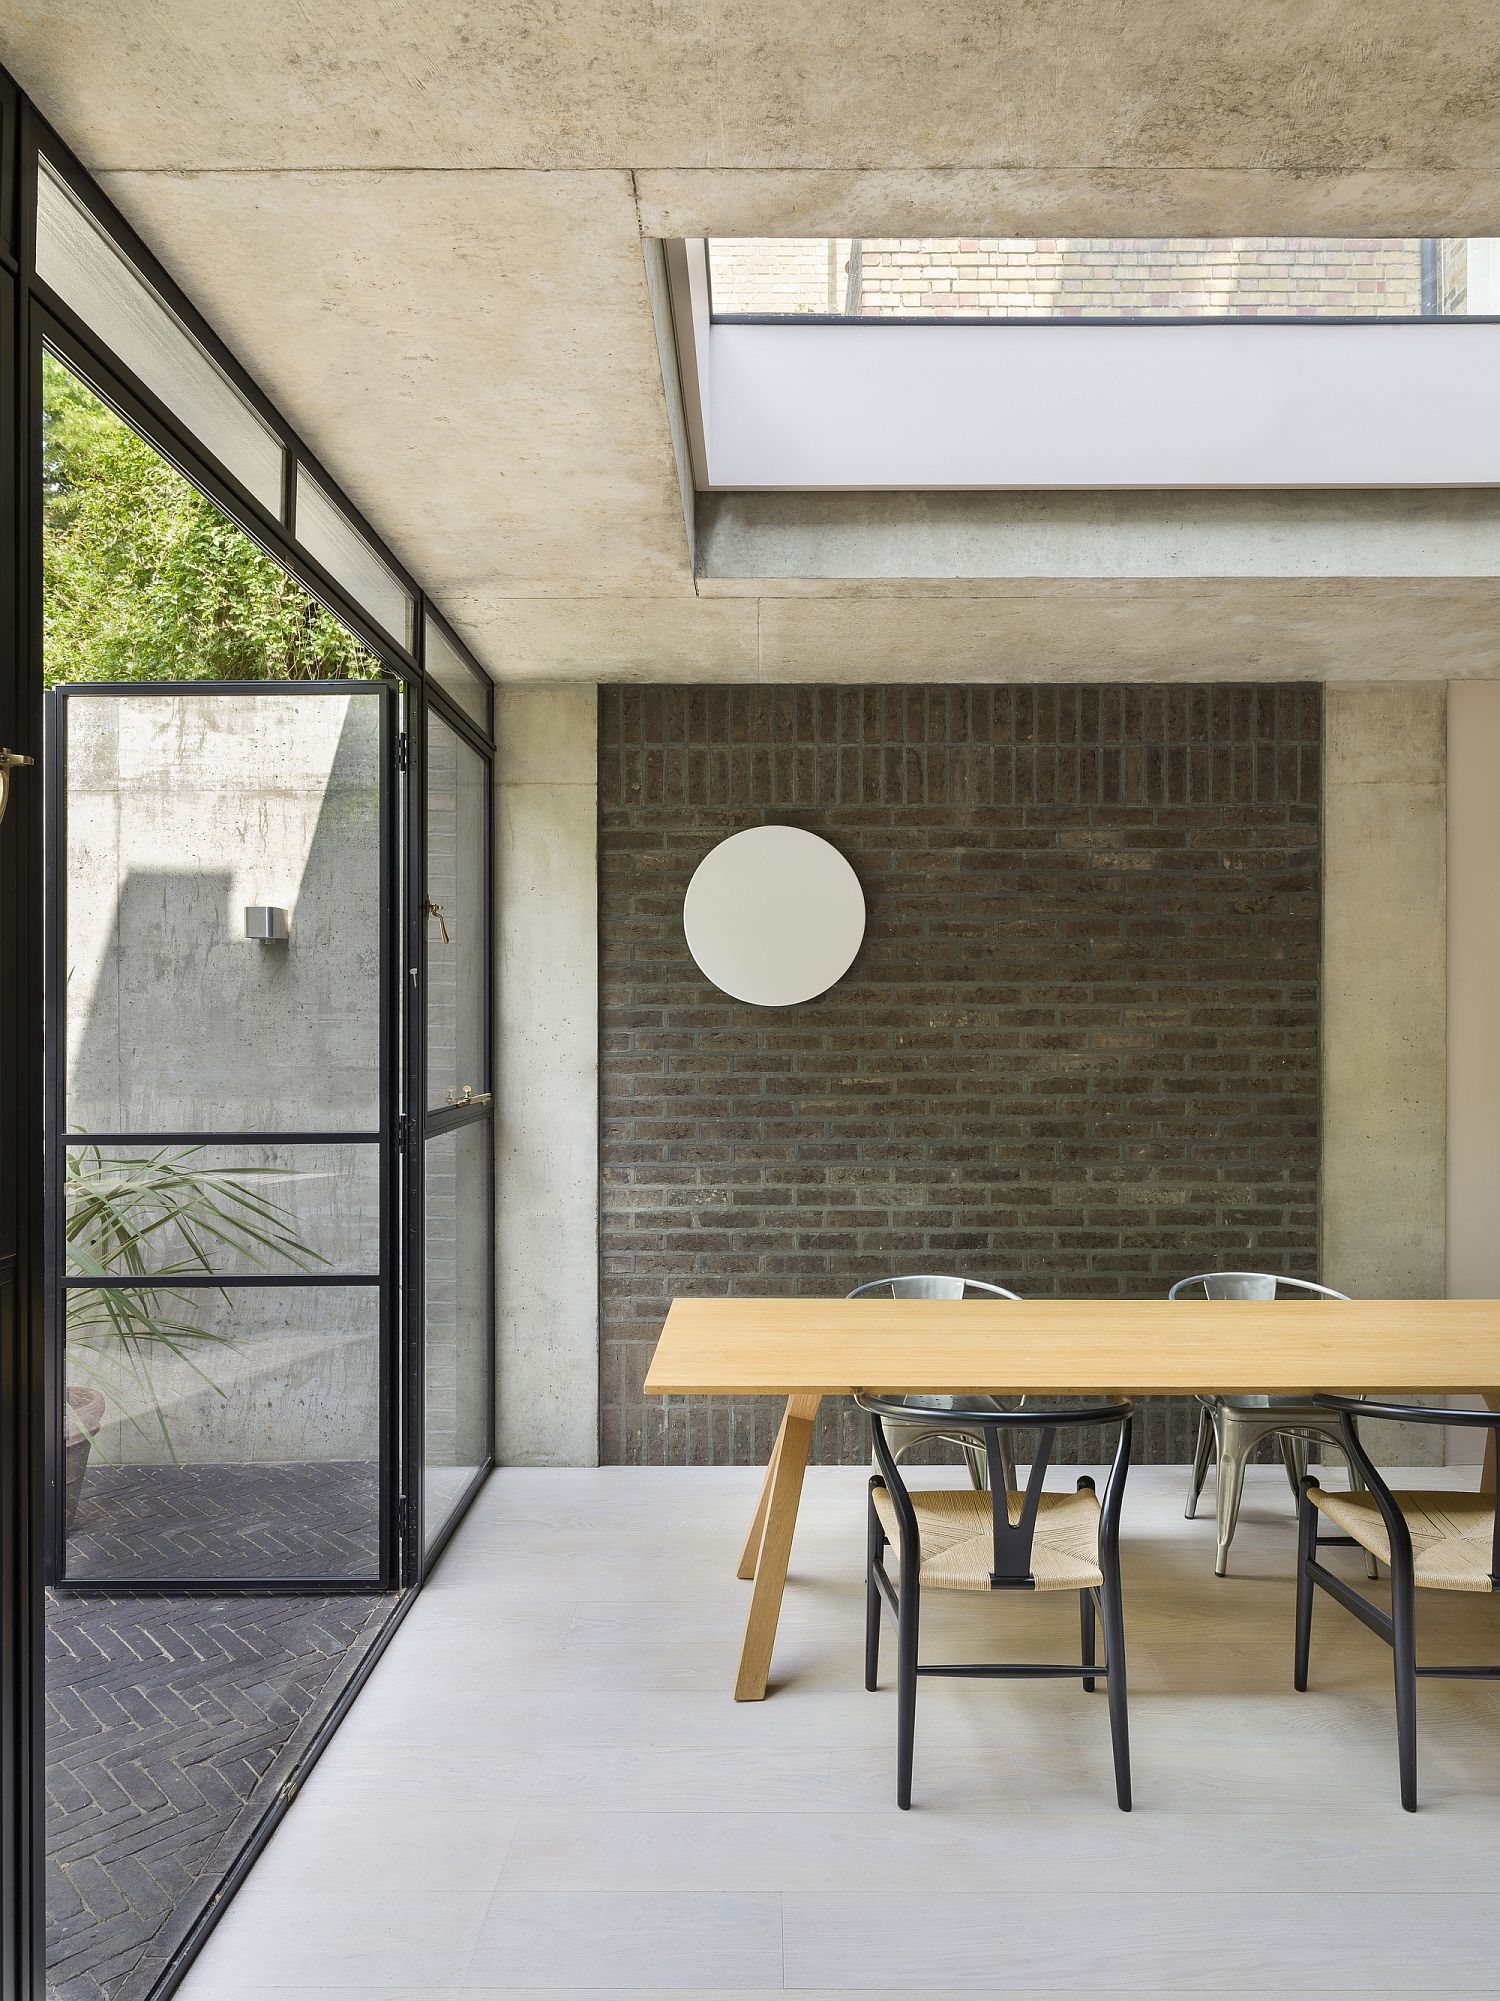 Brick wall section adds even more textural contrast to the dining area